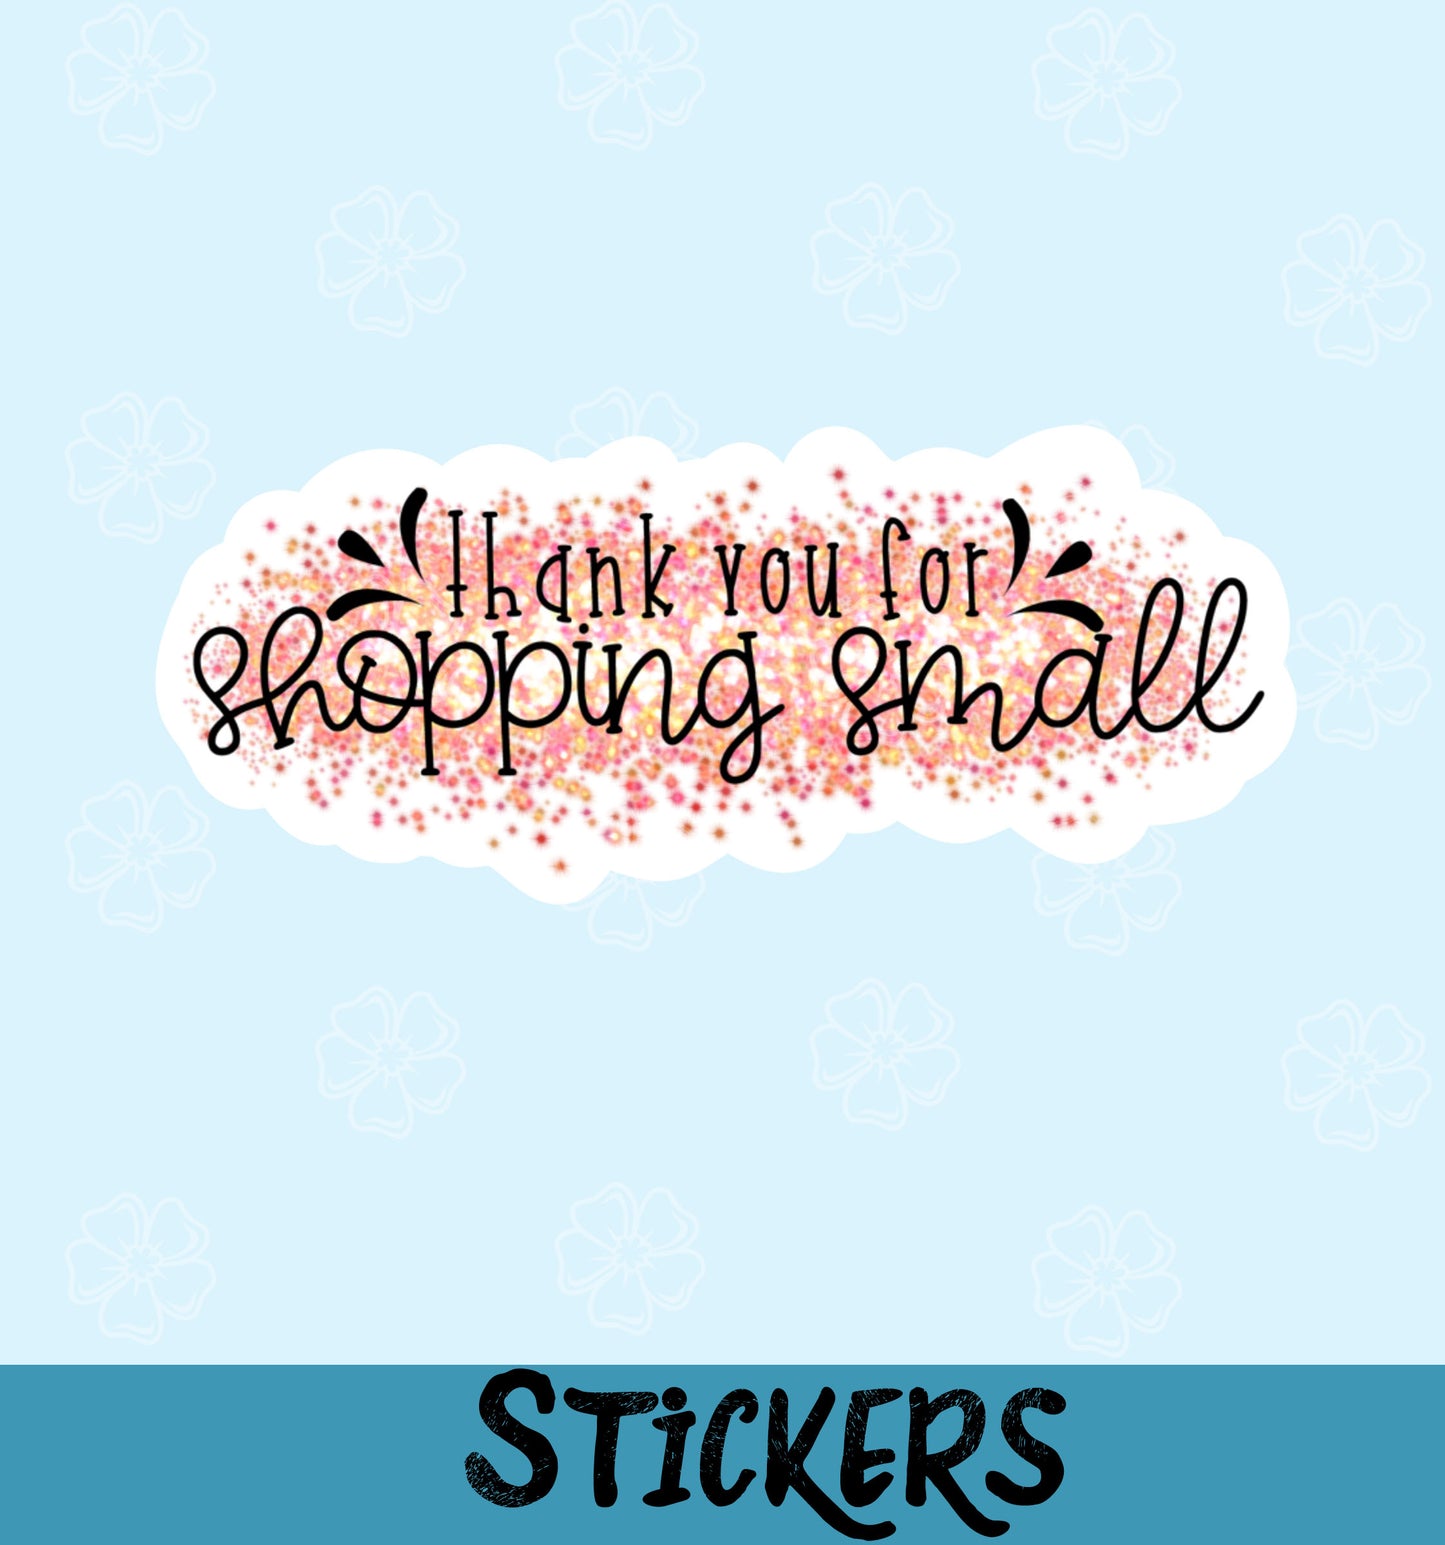 Thank You For Shopping Small #12